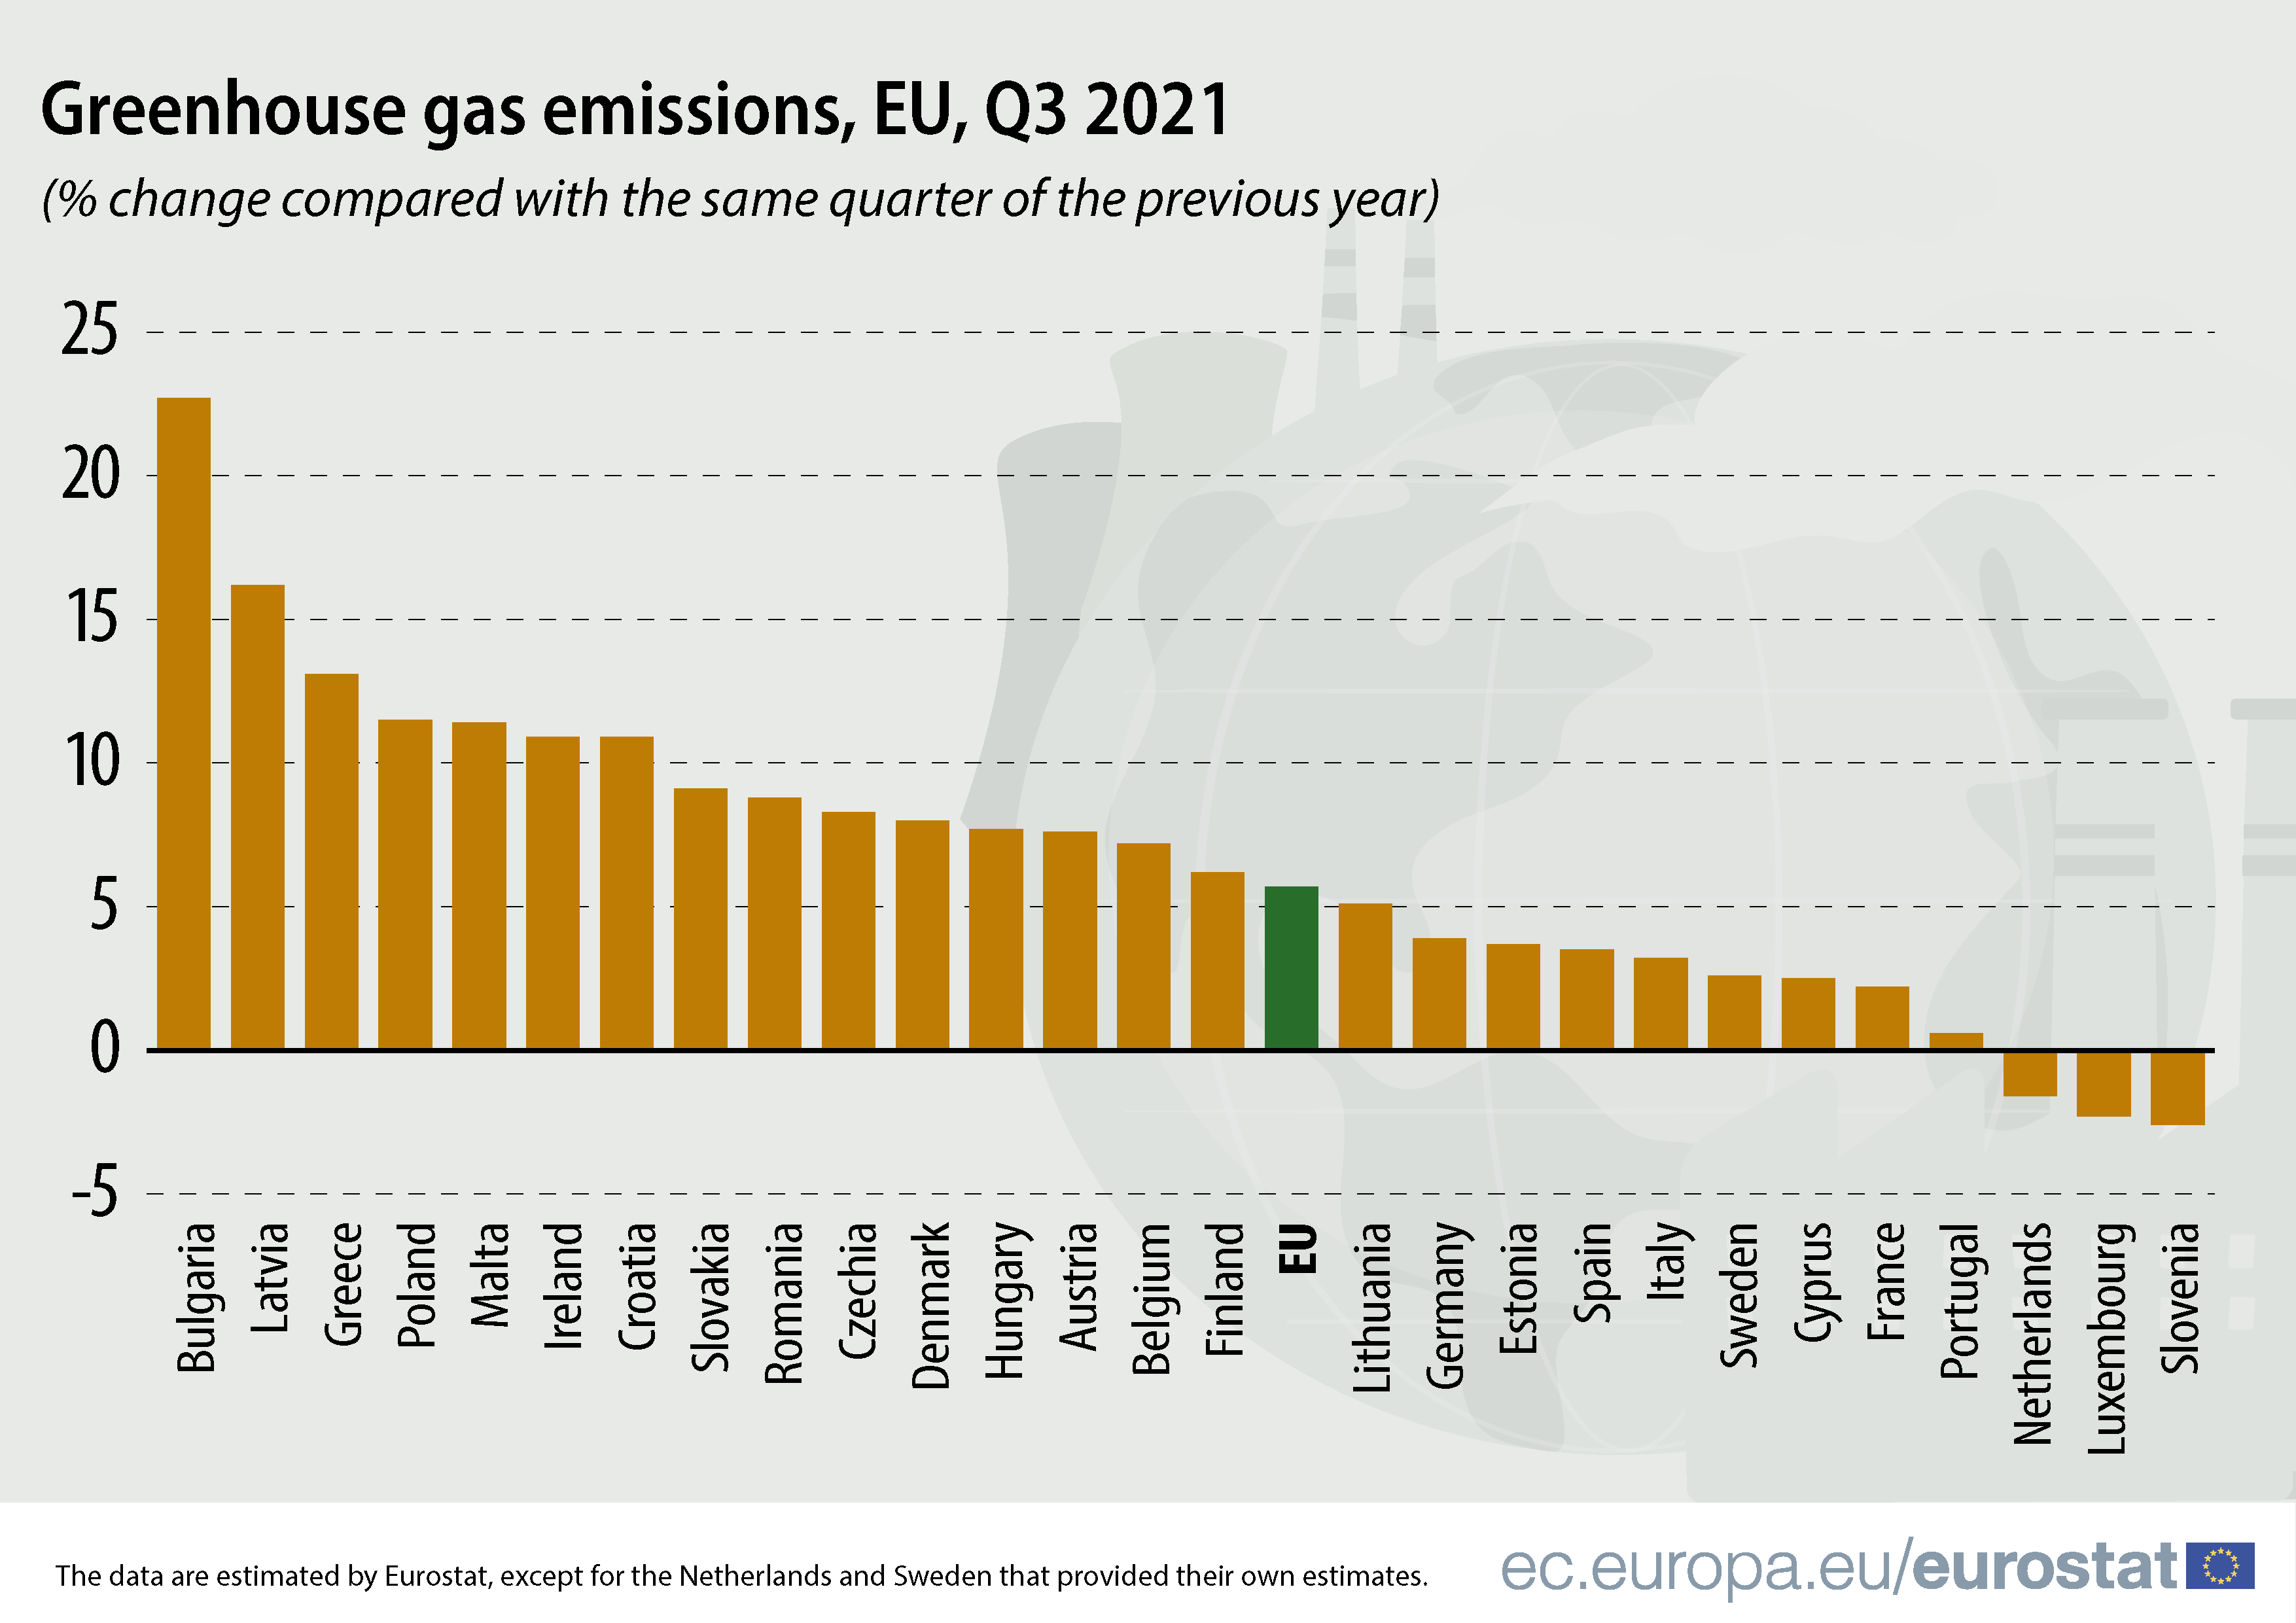 A vertical bar chart showing greenhouse gas emissions in EU member states, with vertical country names